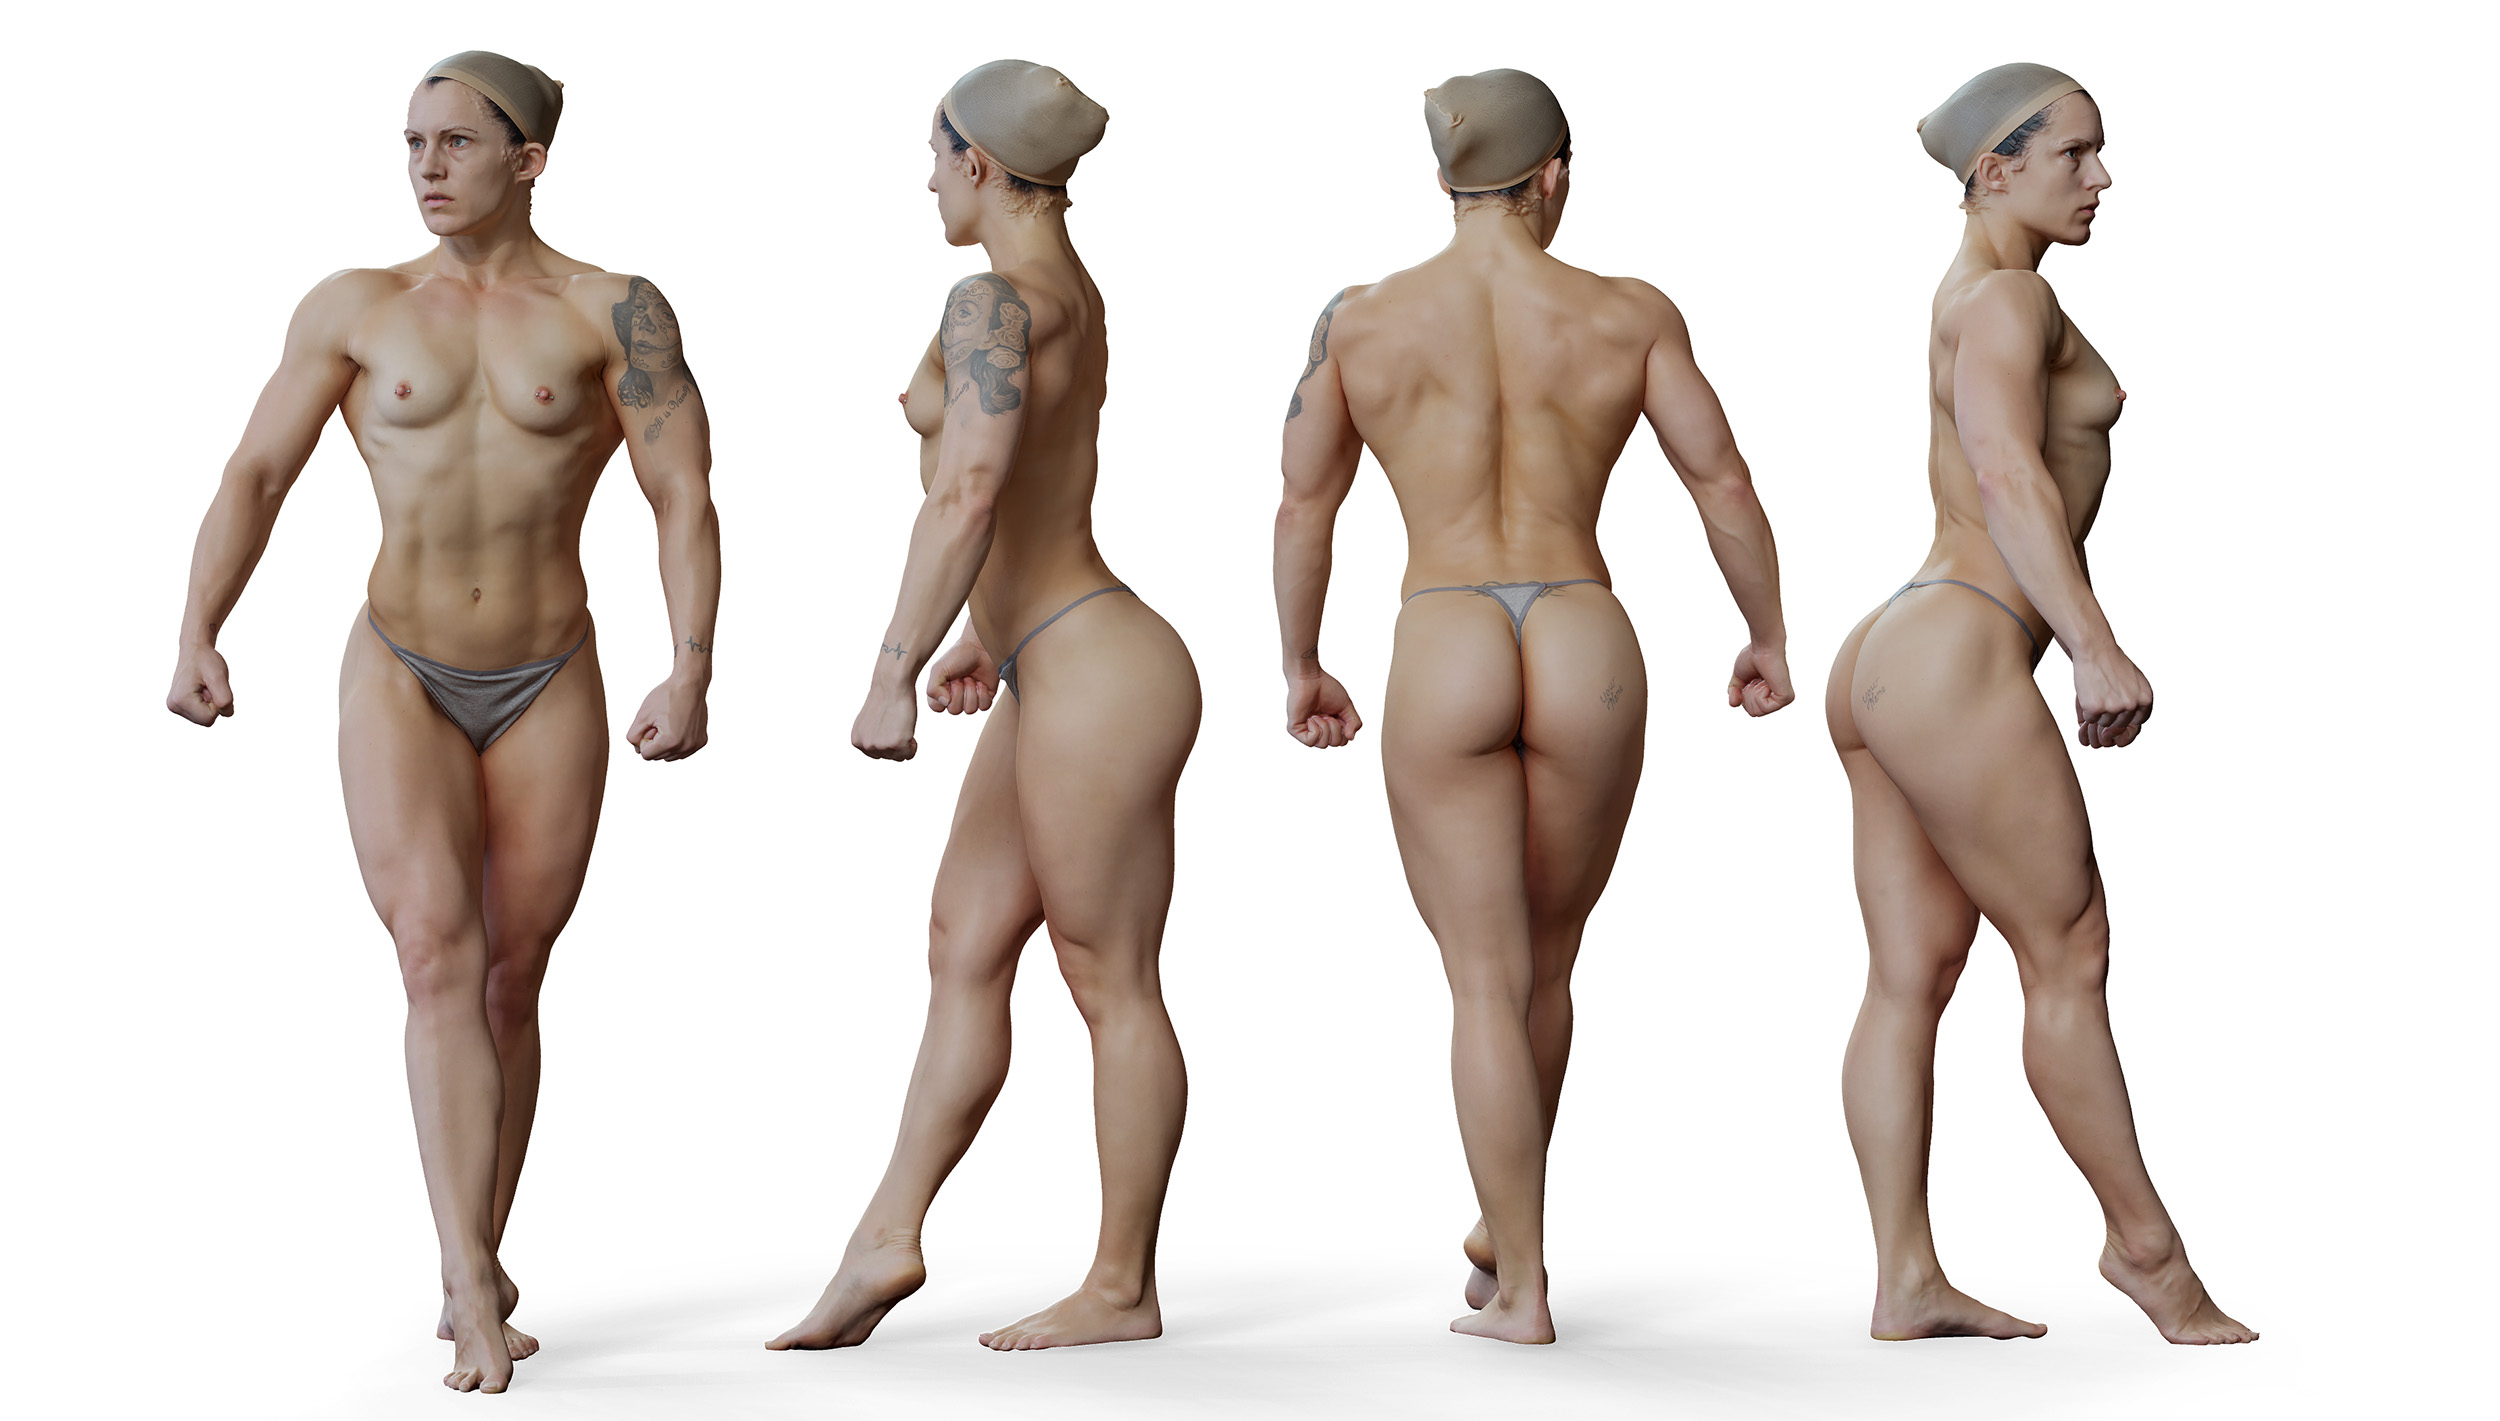 Female 02 Anatomy Reference Pose Pack